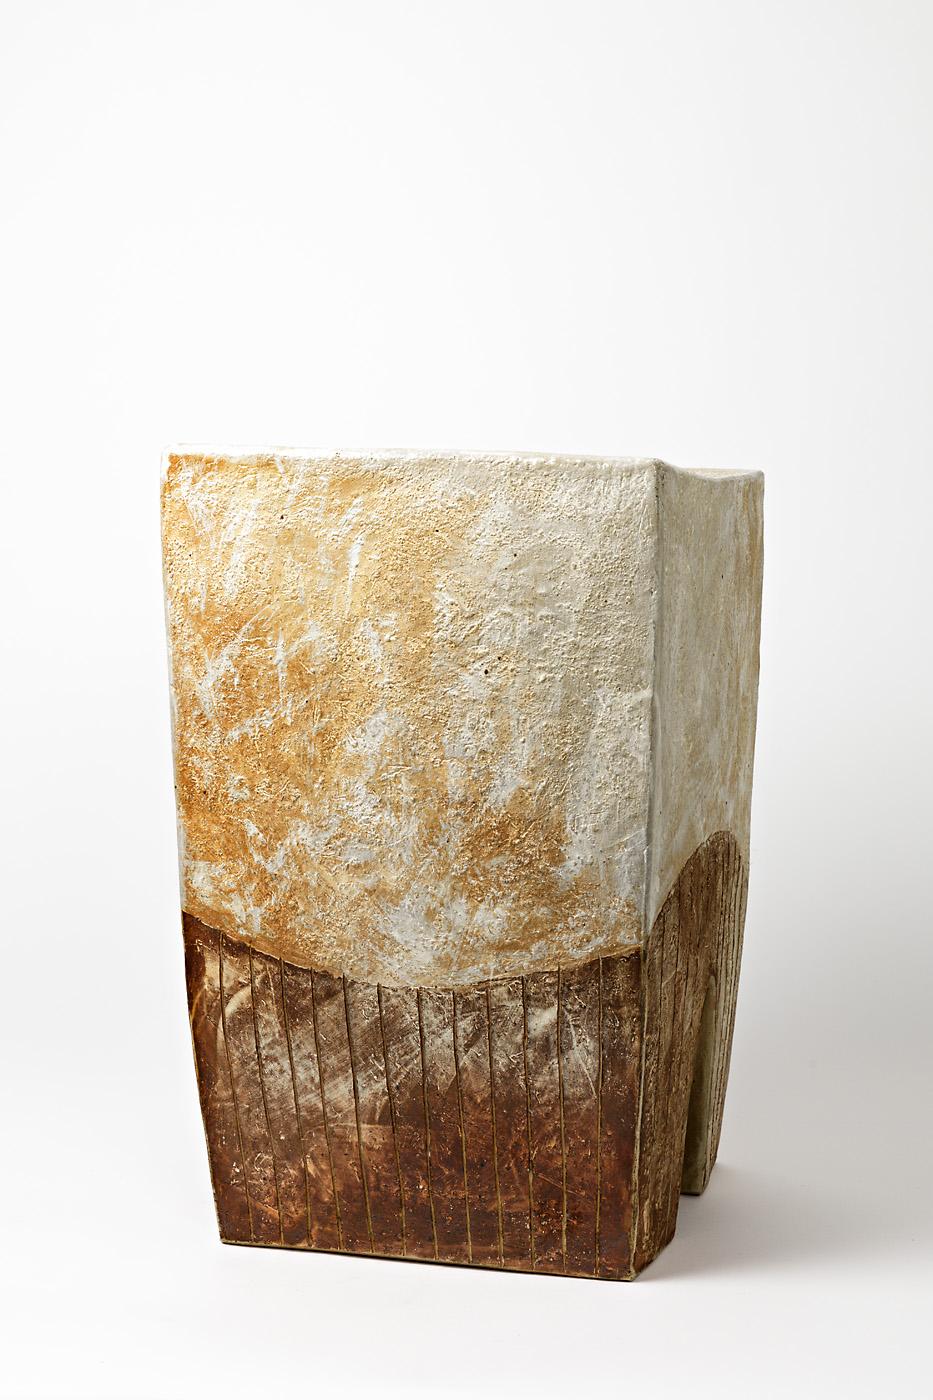 French Stoneware Stool by M. Georg, 2017